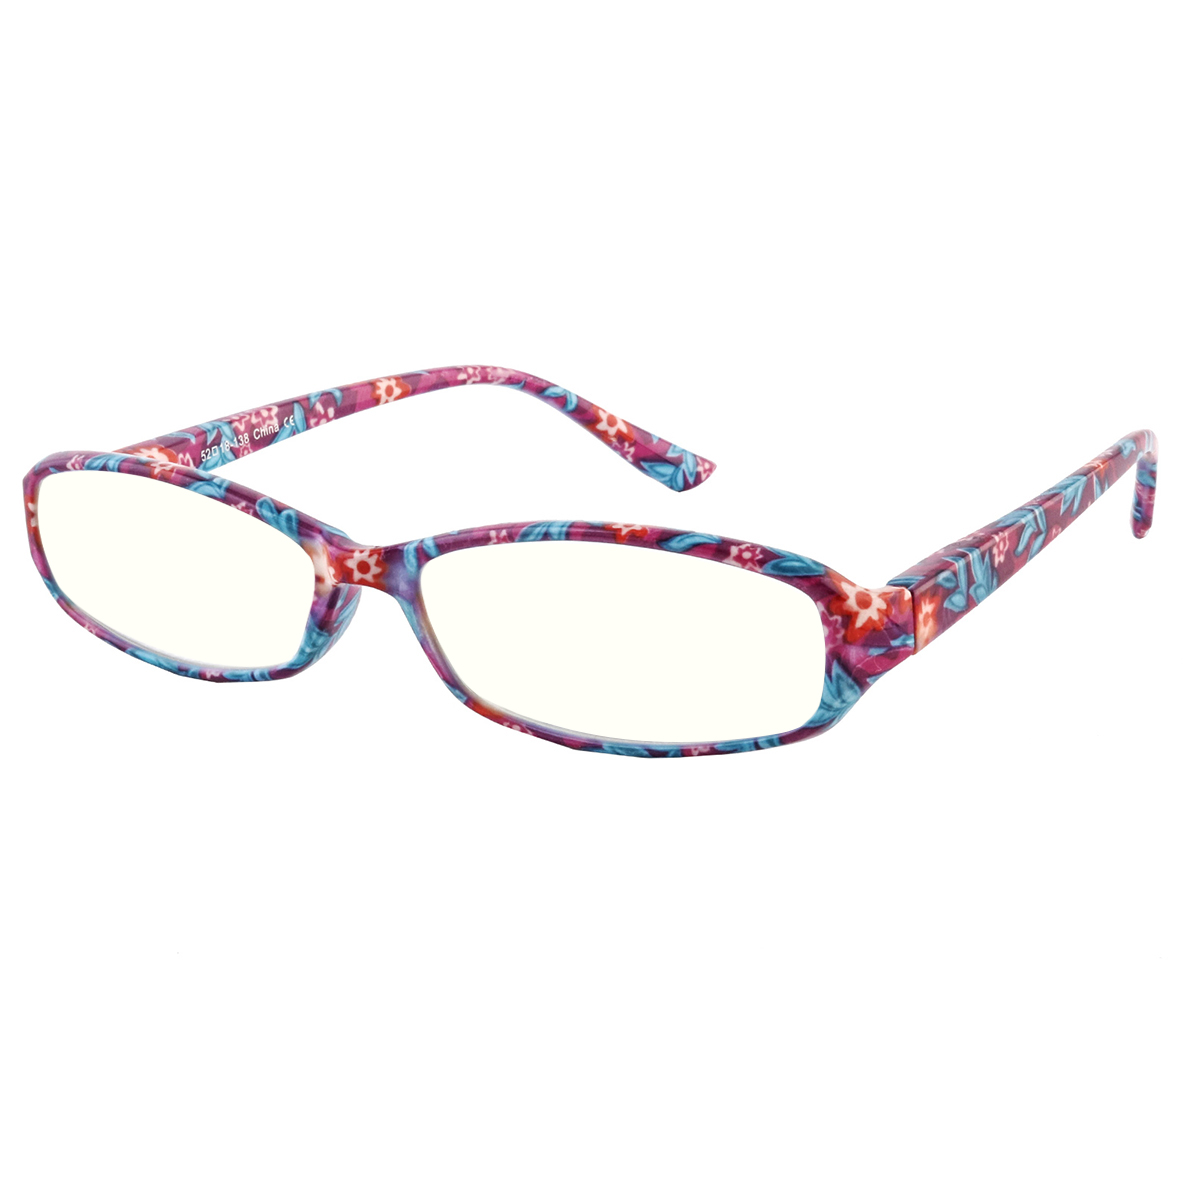 Lorelai - Rectangle Pink-Floral Reading Glasses for Women